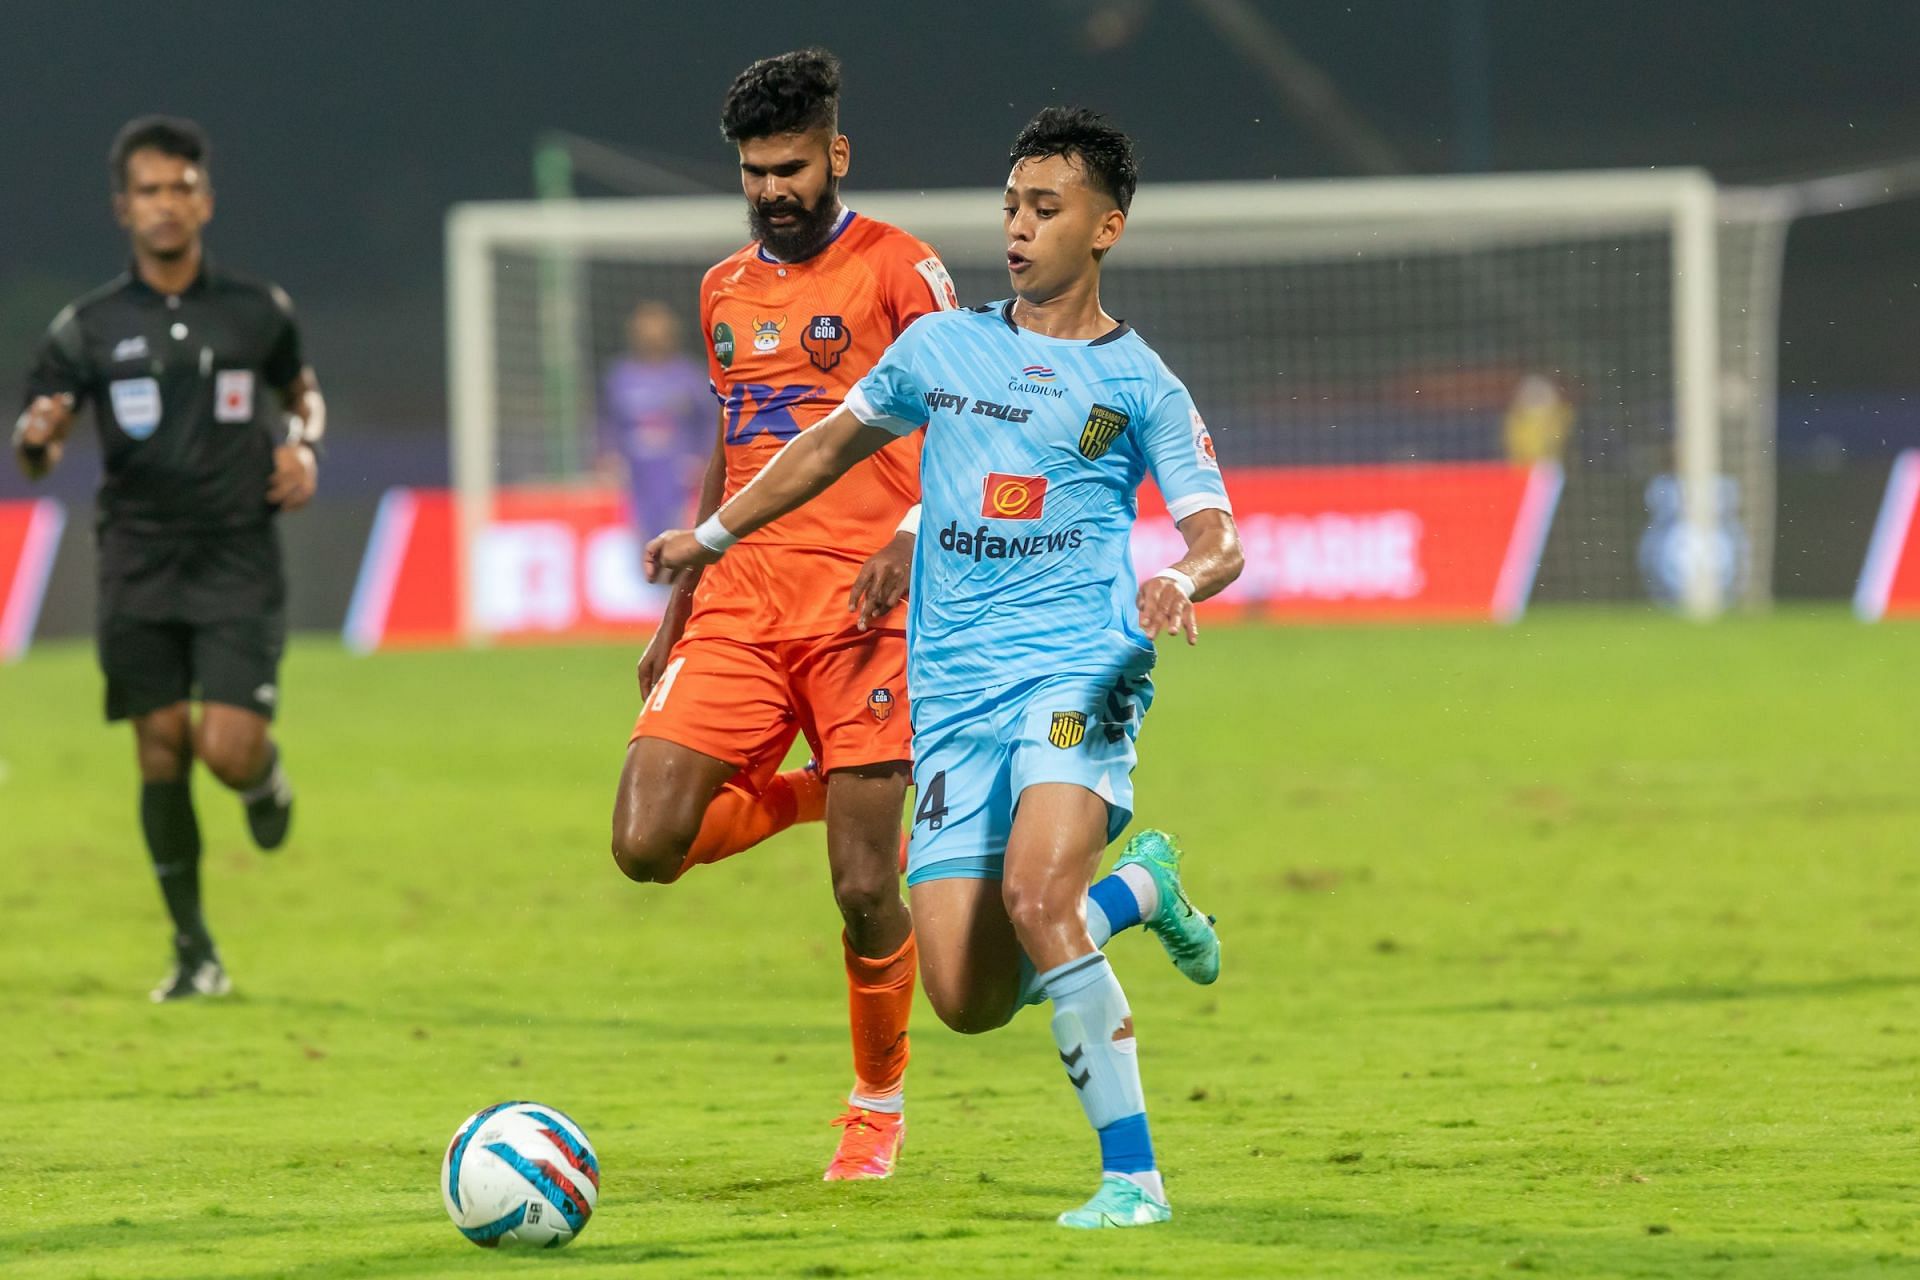 HFC vs FCG: Hyderabad FC will be in search of their first win against FC Goa as they look to consolidate lead at the summit